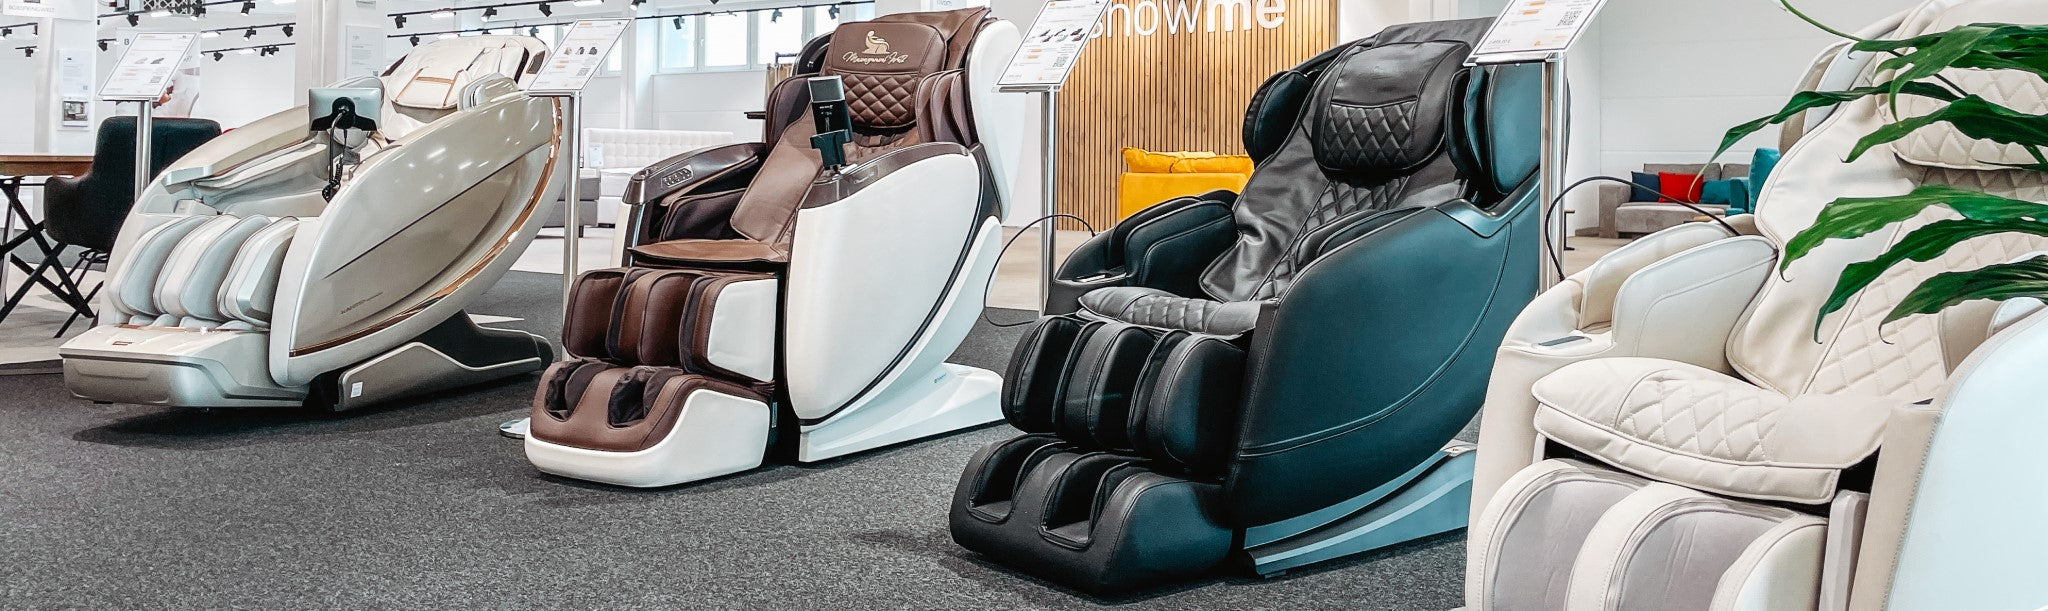 Massage chair world - We show you what massage chairs can really do!